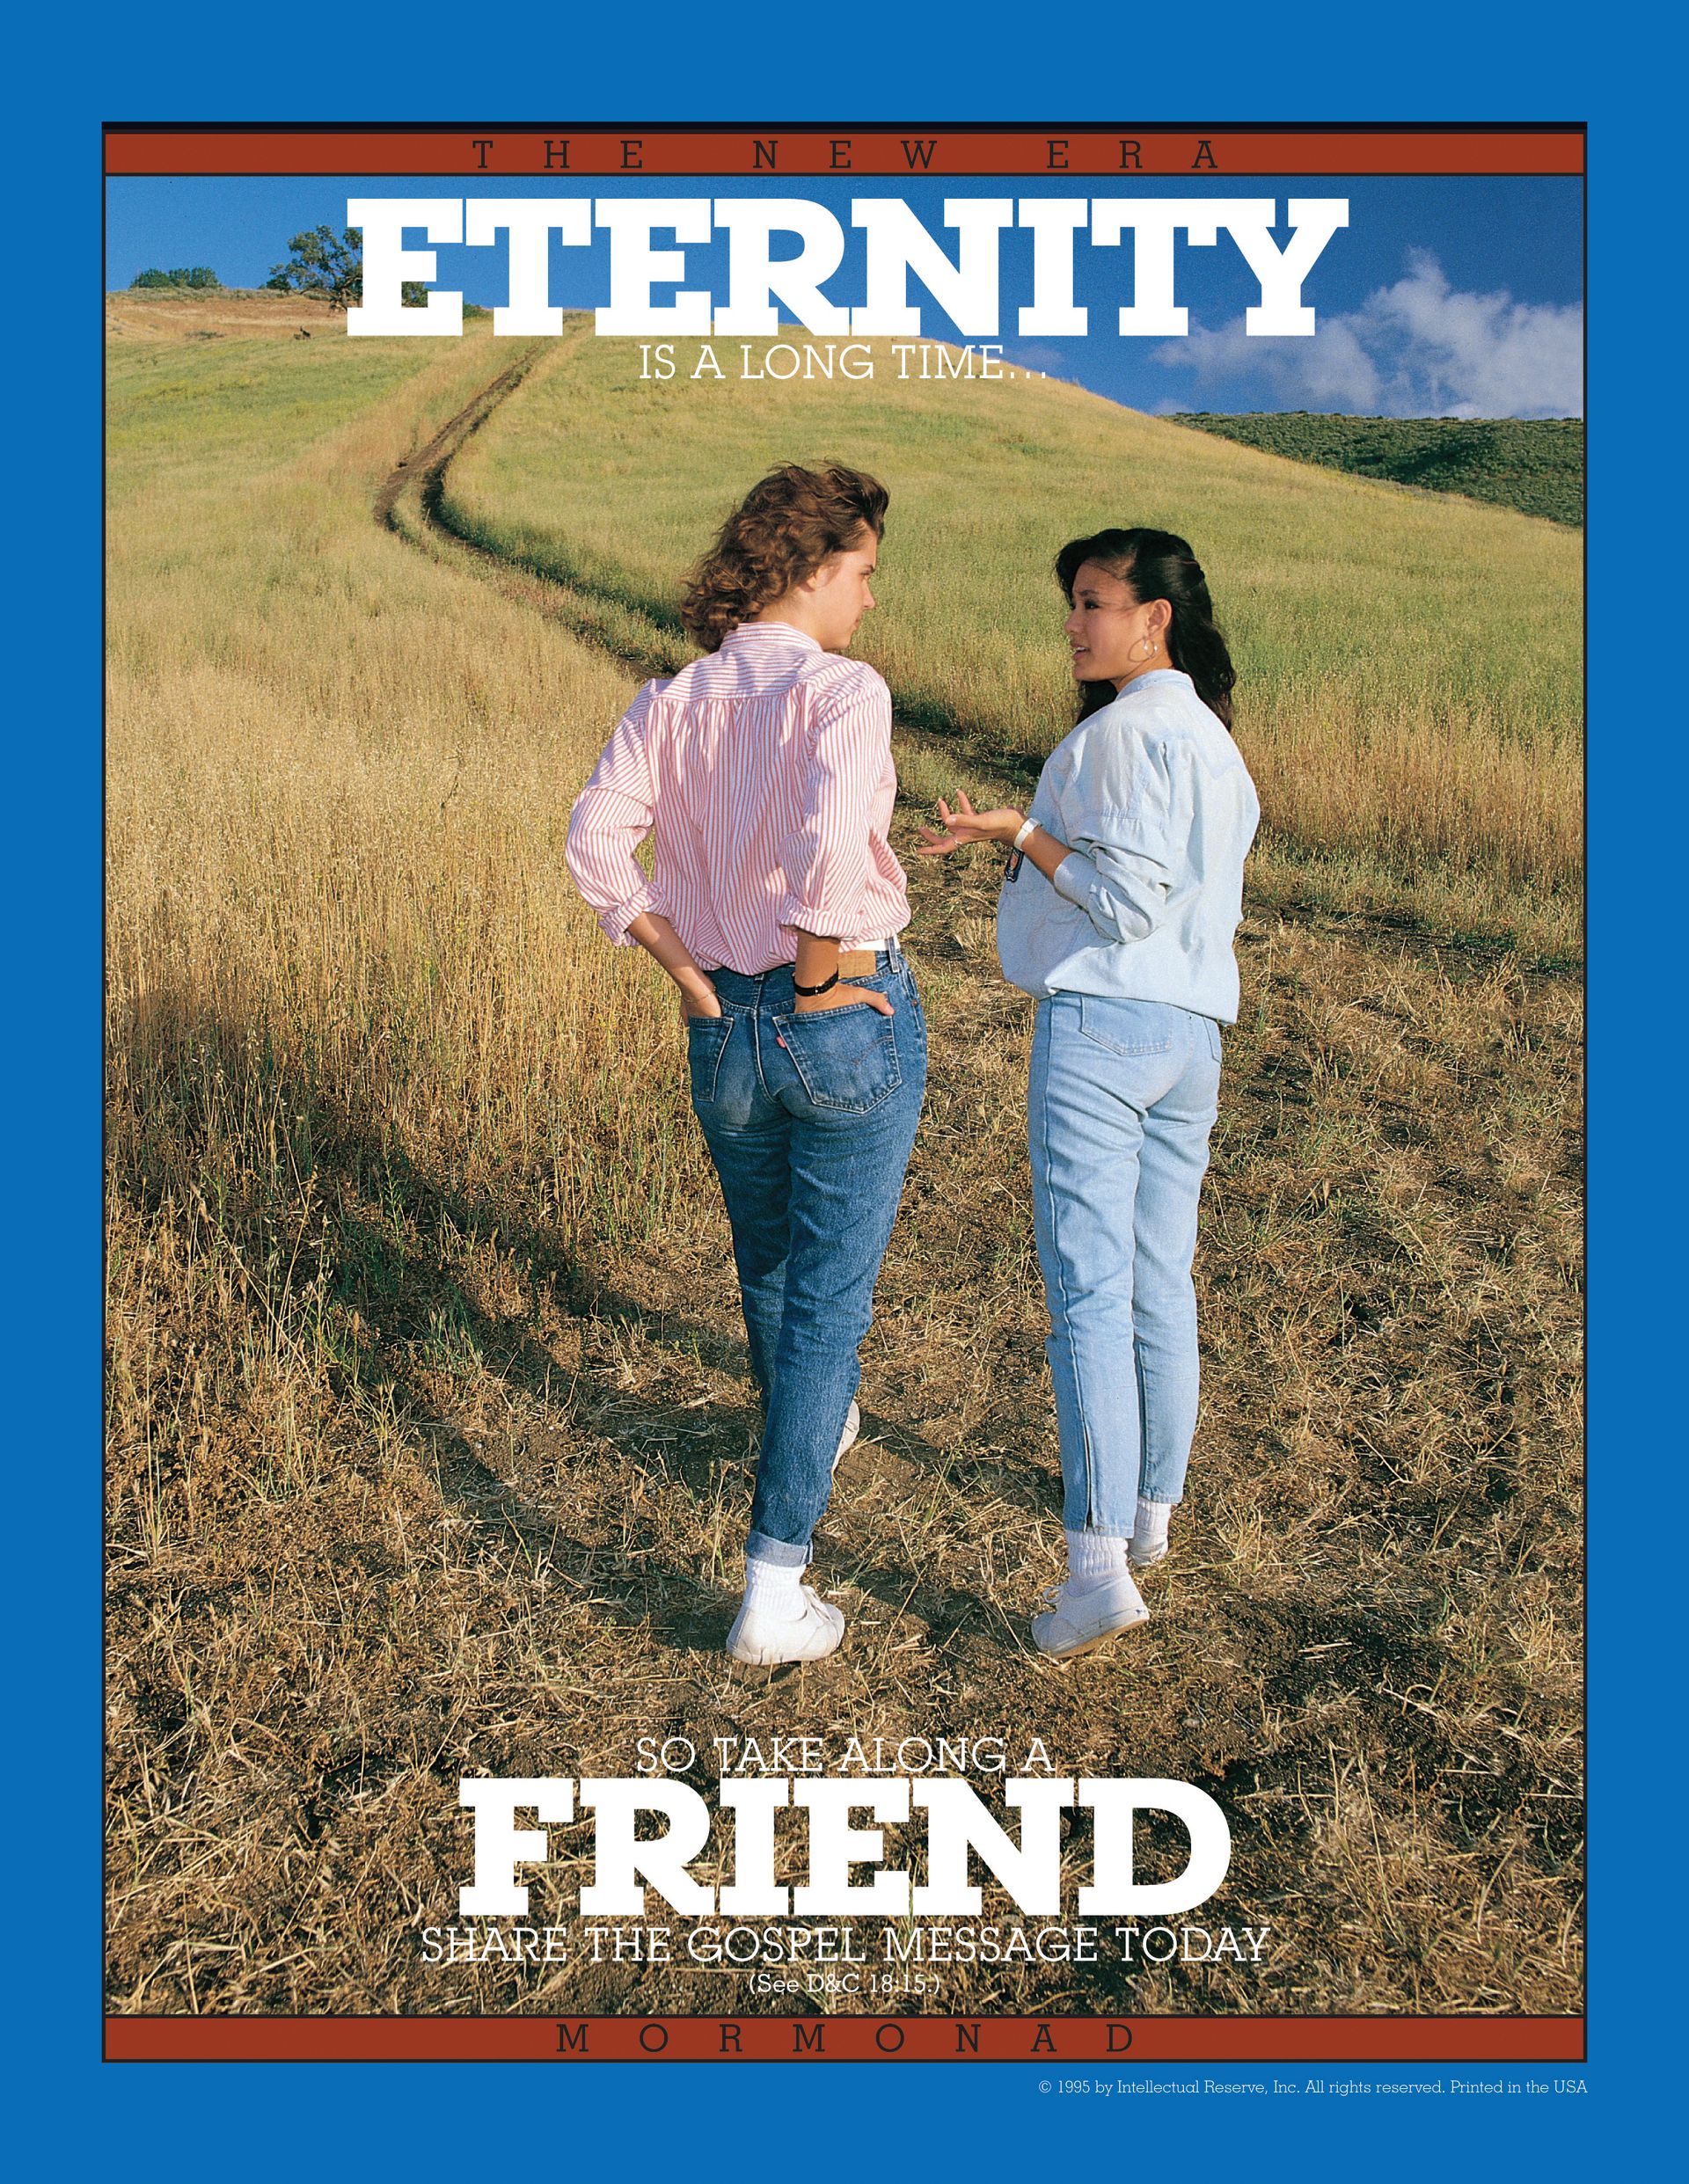 Eternity Is a Long Time, So Take Along a Friend. Share the gospel message today. July 1988 © undefined ipCode 1.